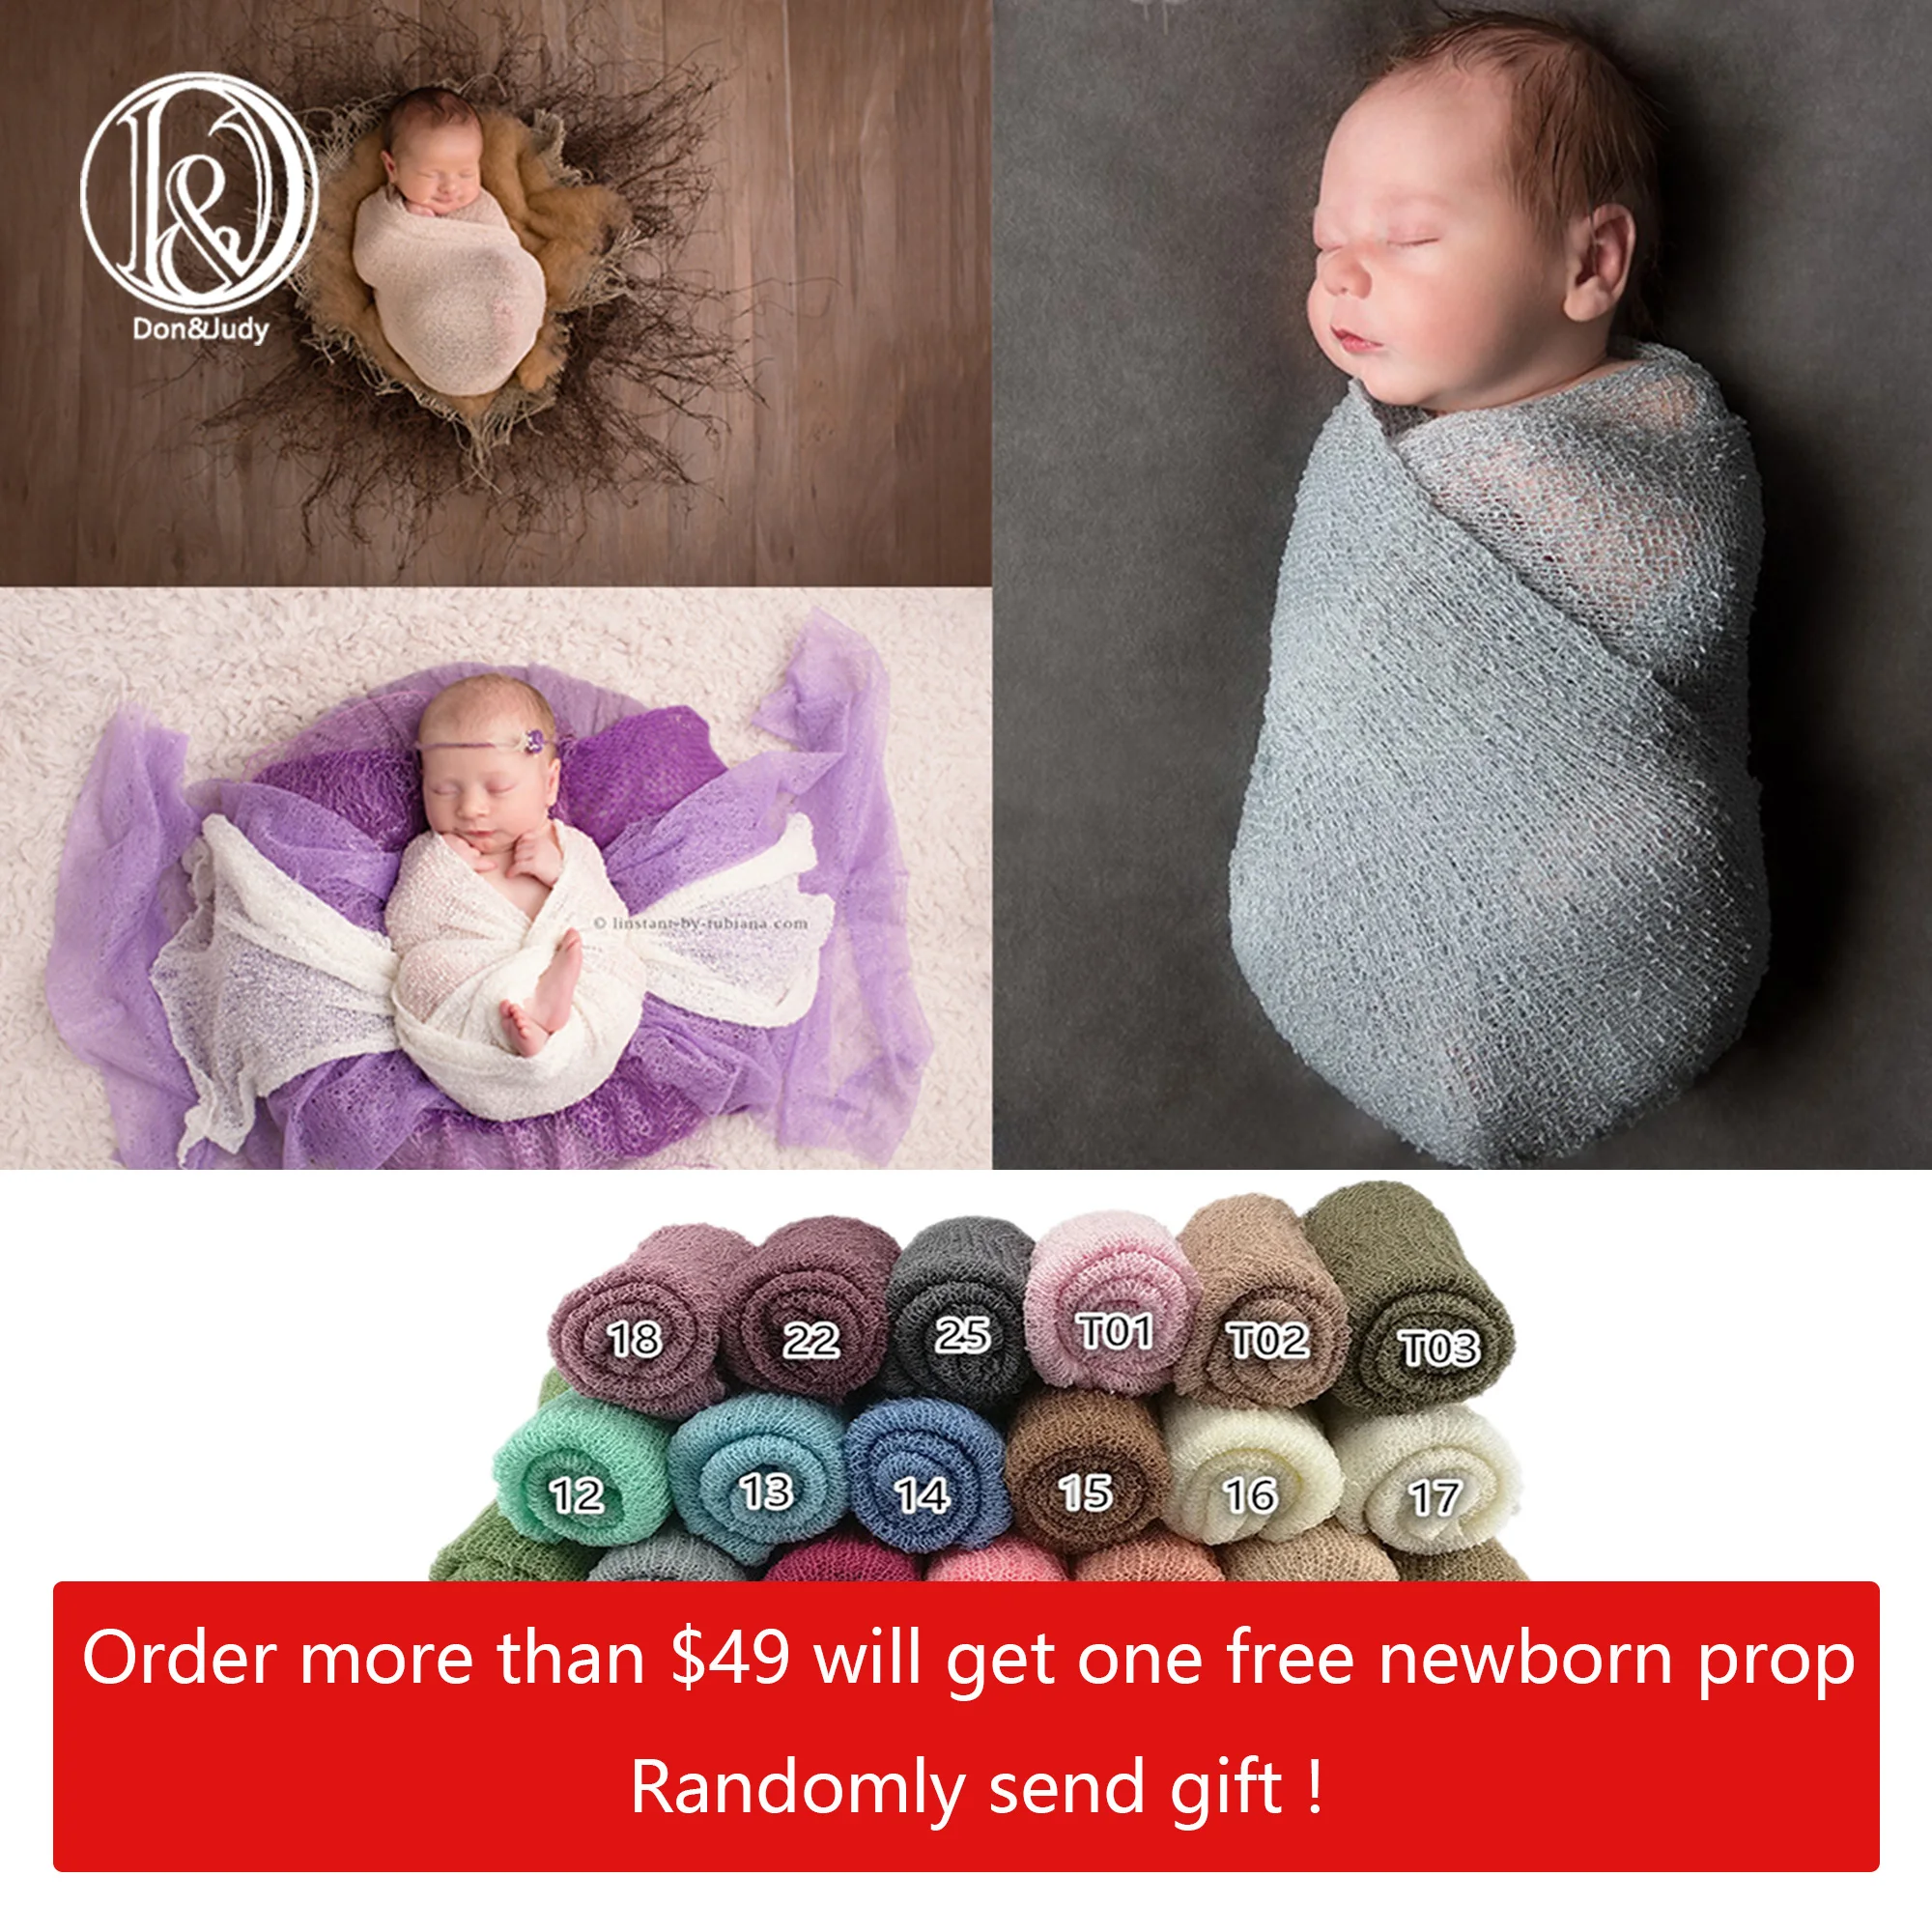 Soft Knit Stretchy Wraps Swaddle For Newborn Baby Photography Props Kids Receiving Blankets Cloth Accessories For Photo Shooting knit stretch wraps swaddle for newborn photography props baby kids wrap receiving blankets cloth accessories for photo shooting